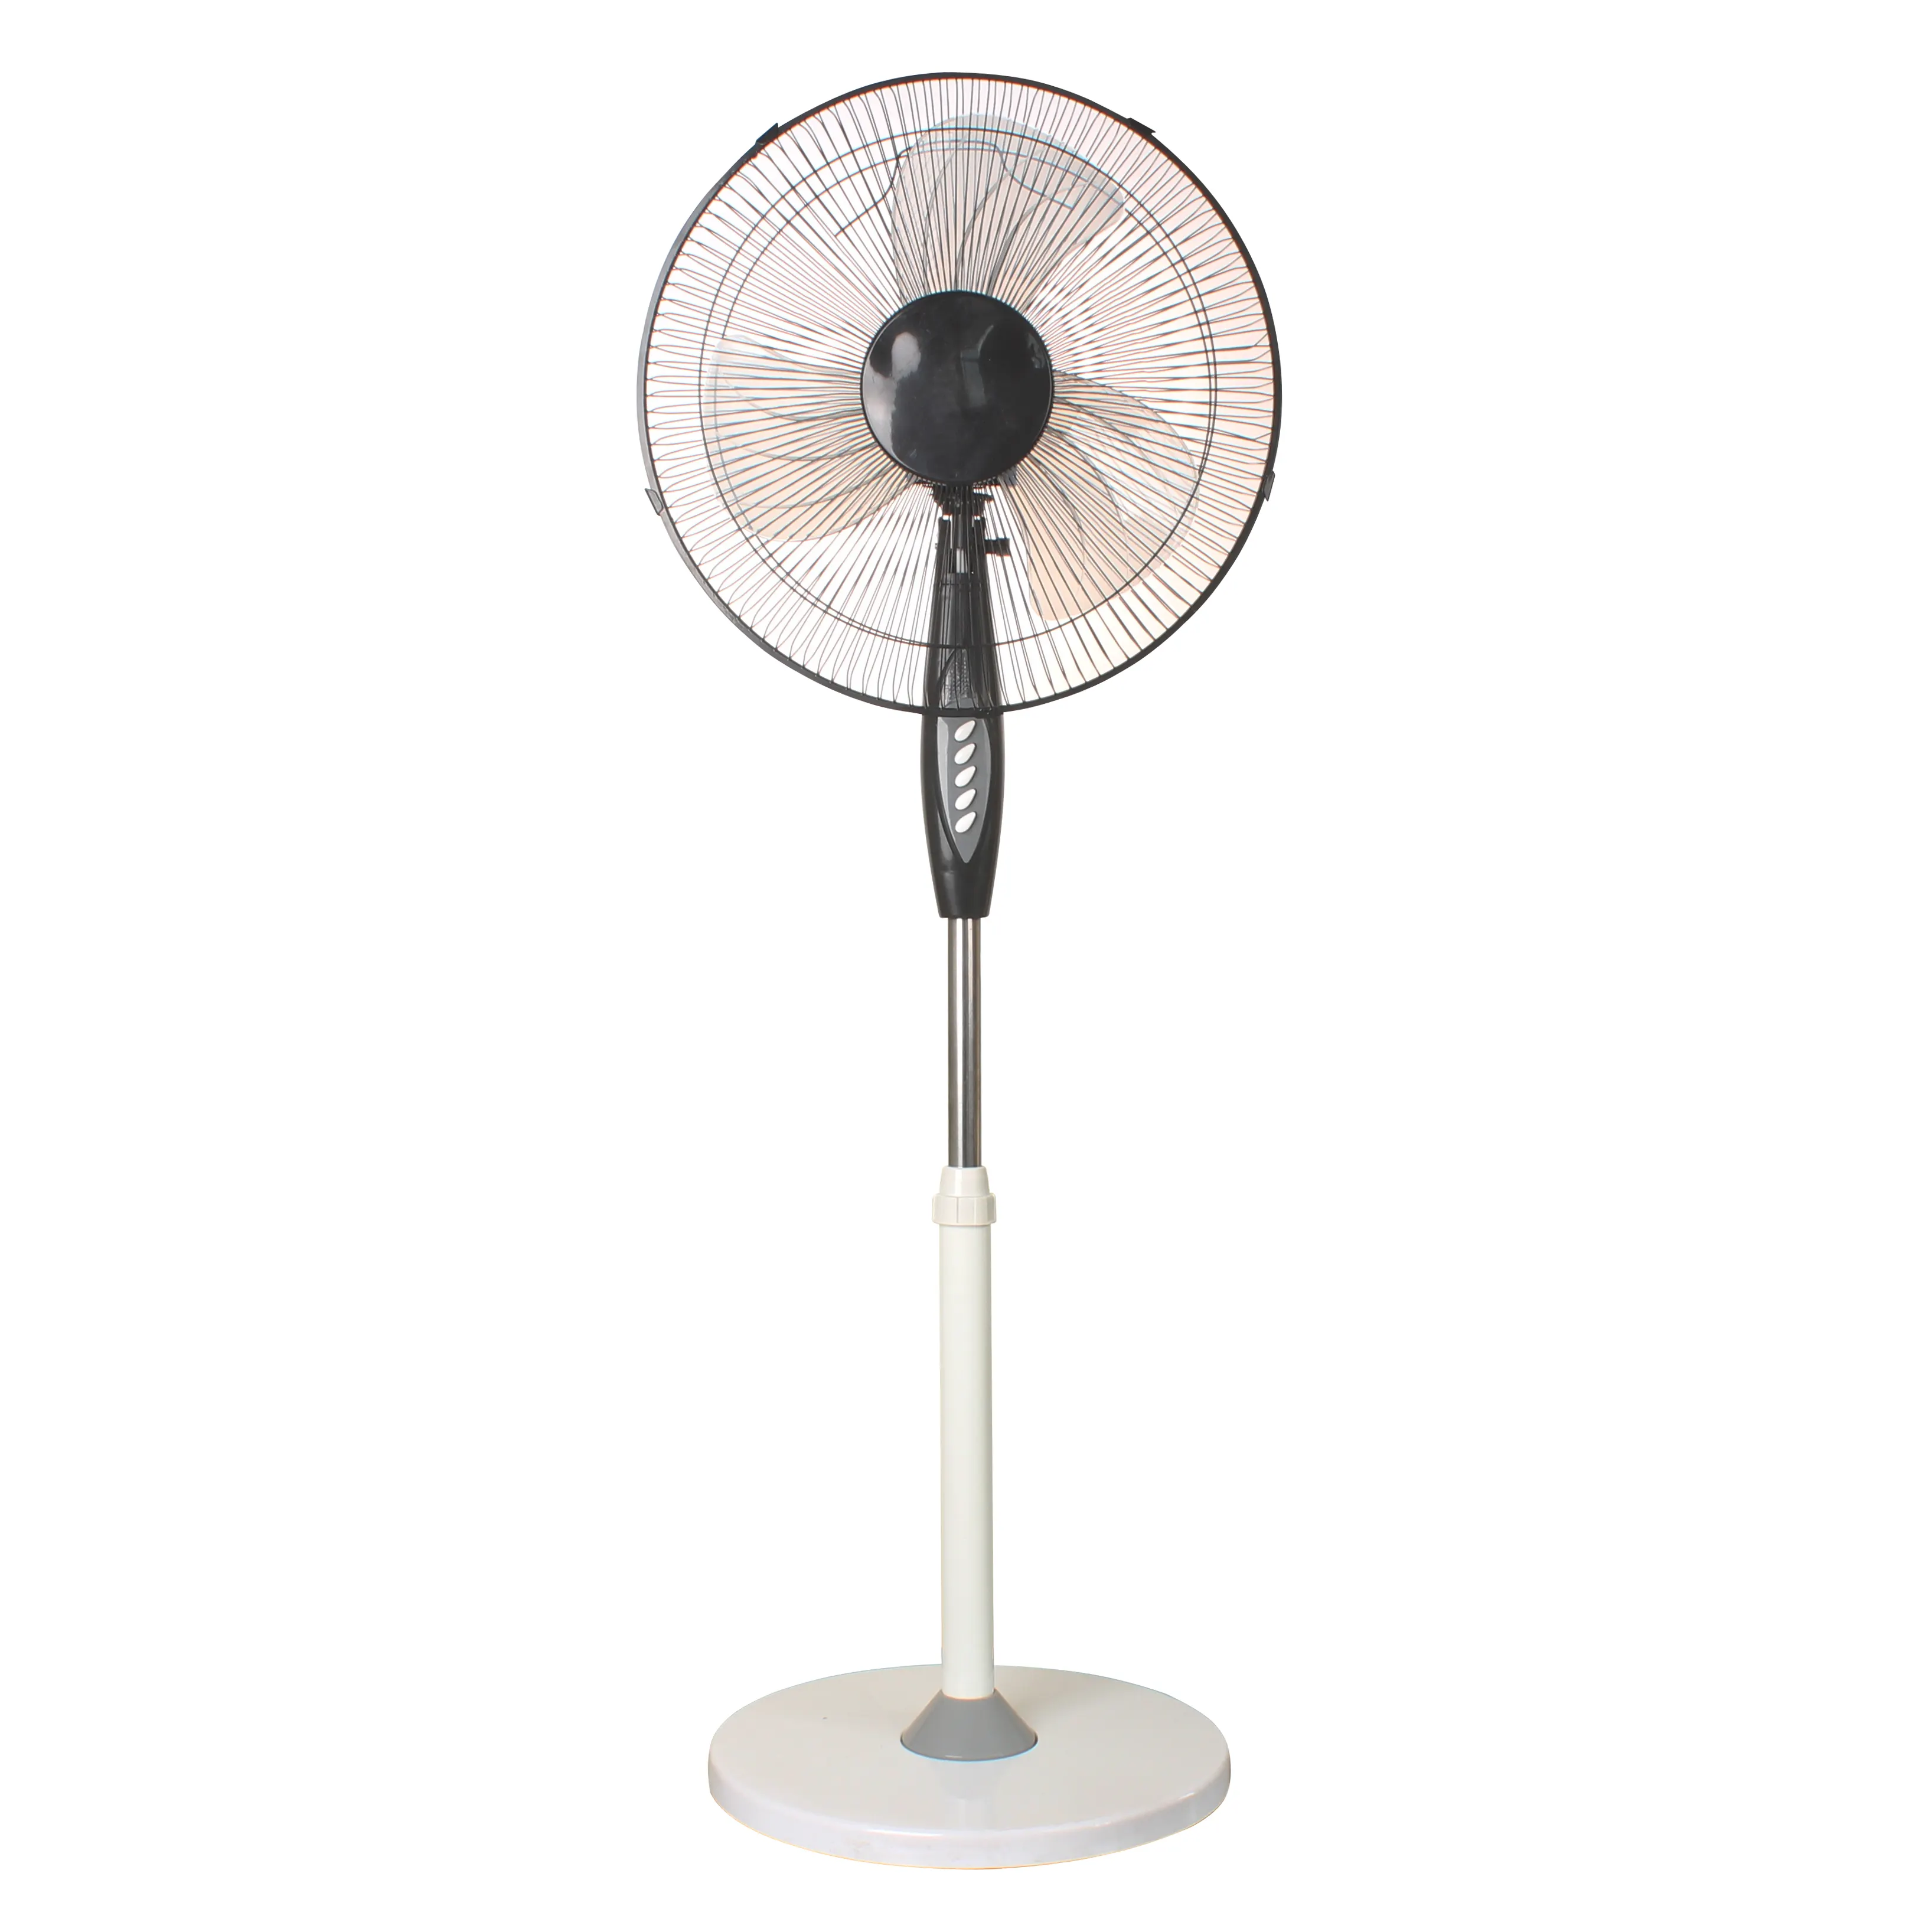 China Supplier 220v indoor Stand Fan Low Price 16 Inch Electric Fan With Remote Control